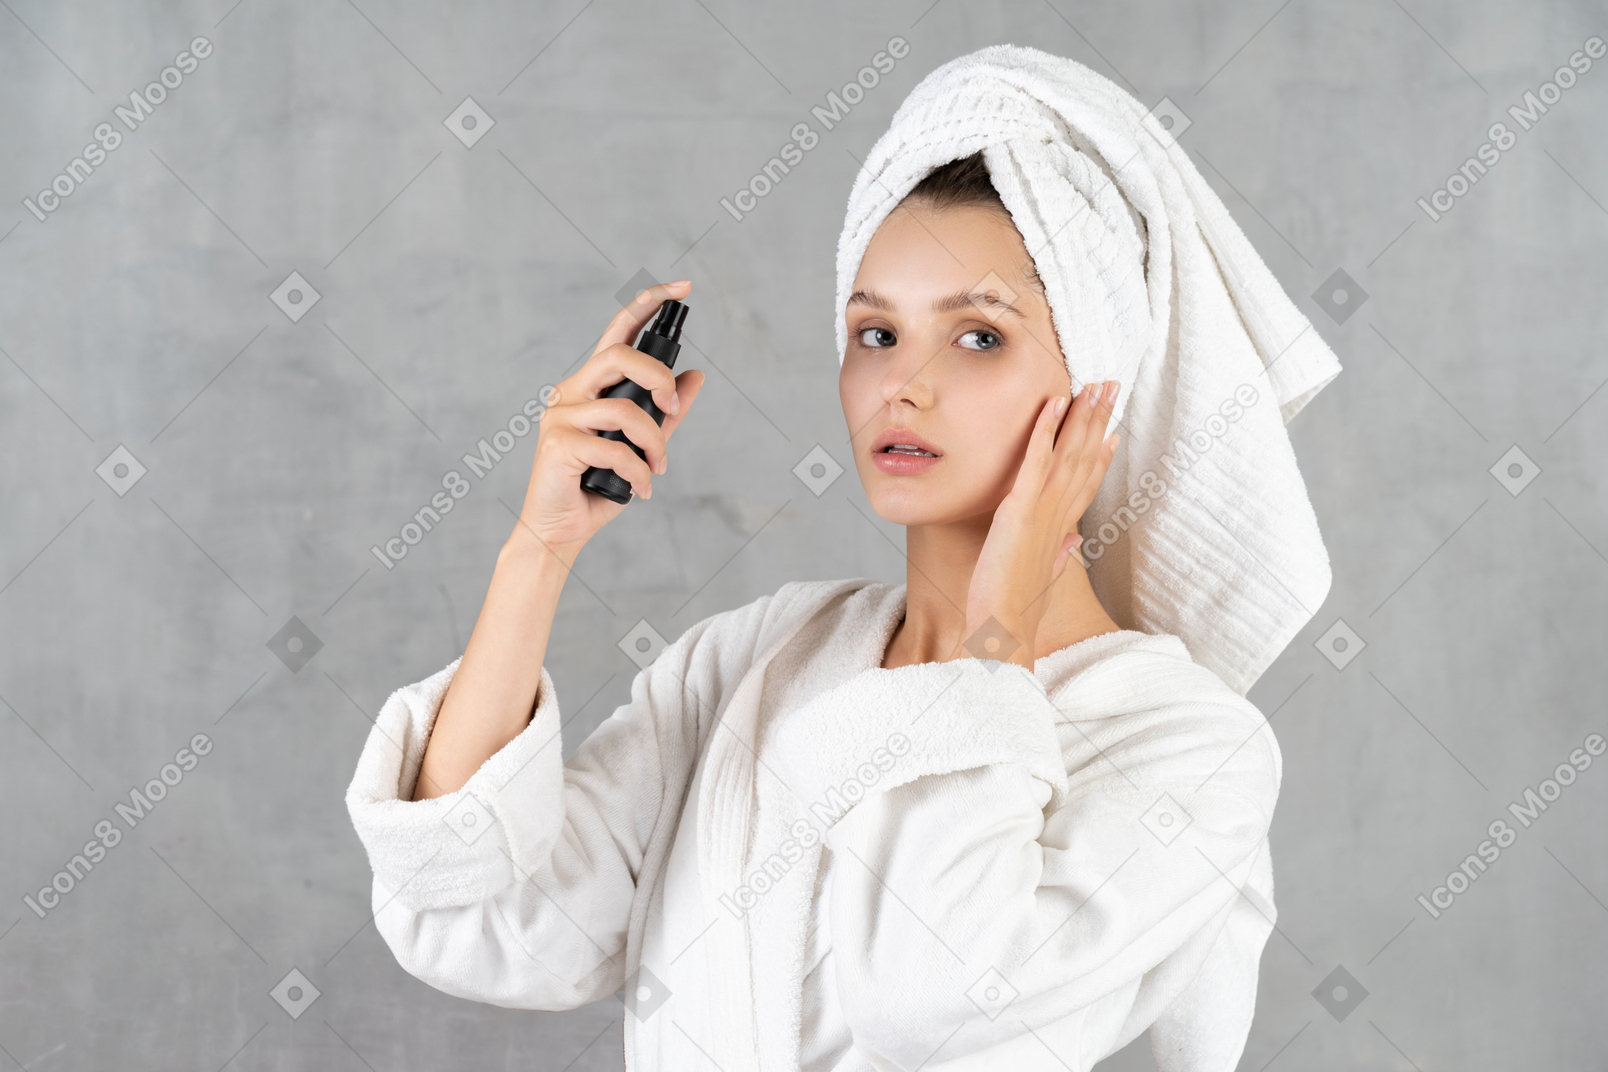 Woman in bathrobe spraying her face and touching her cheek